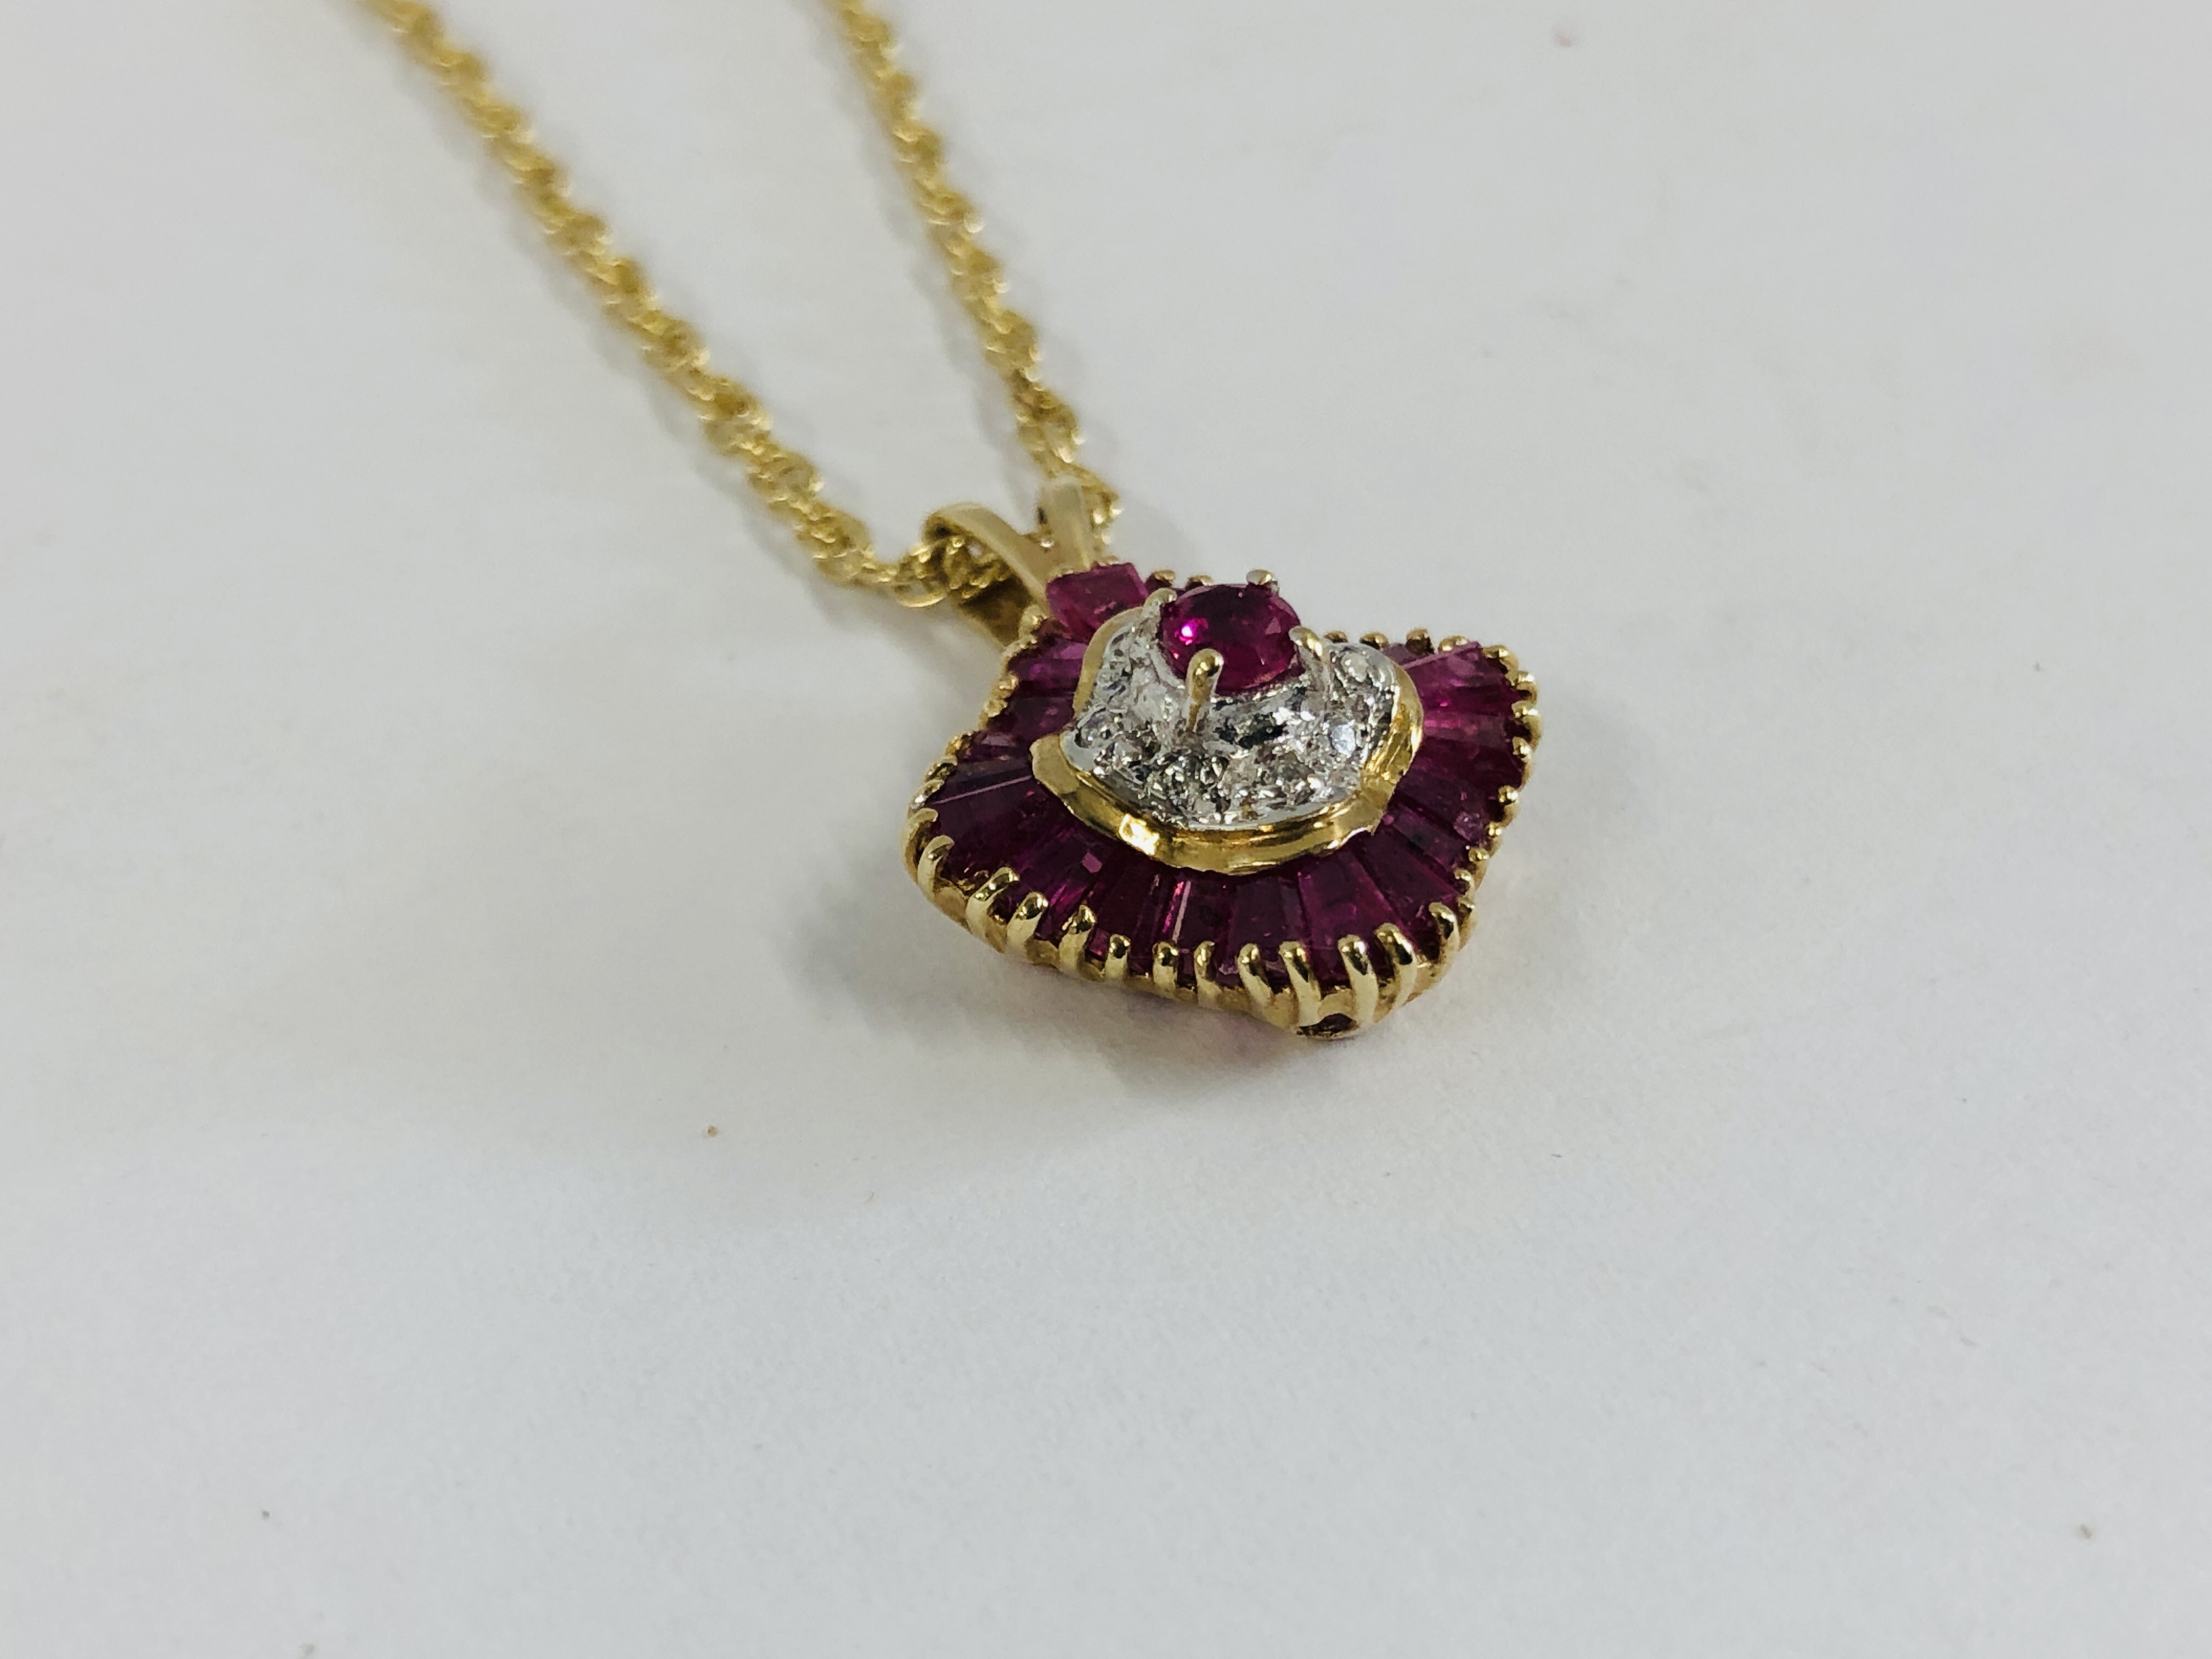 AN ORNATE PENDANT SET WITH MAINLY PINK STONE ON A FINE INTERTWINED 9CT GOLD CHAIN. - Image 4 of 12